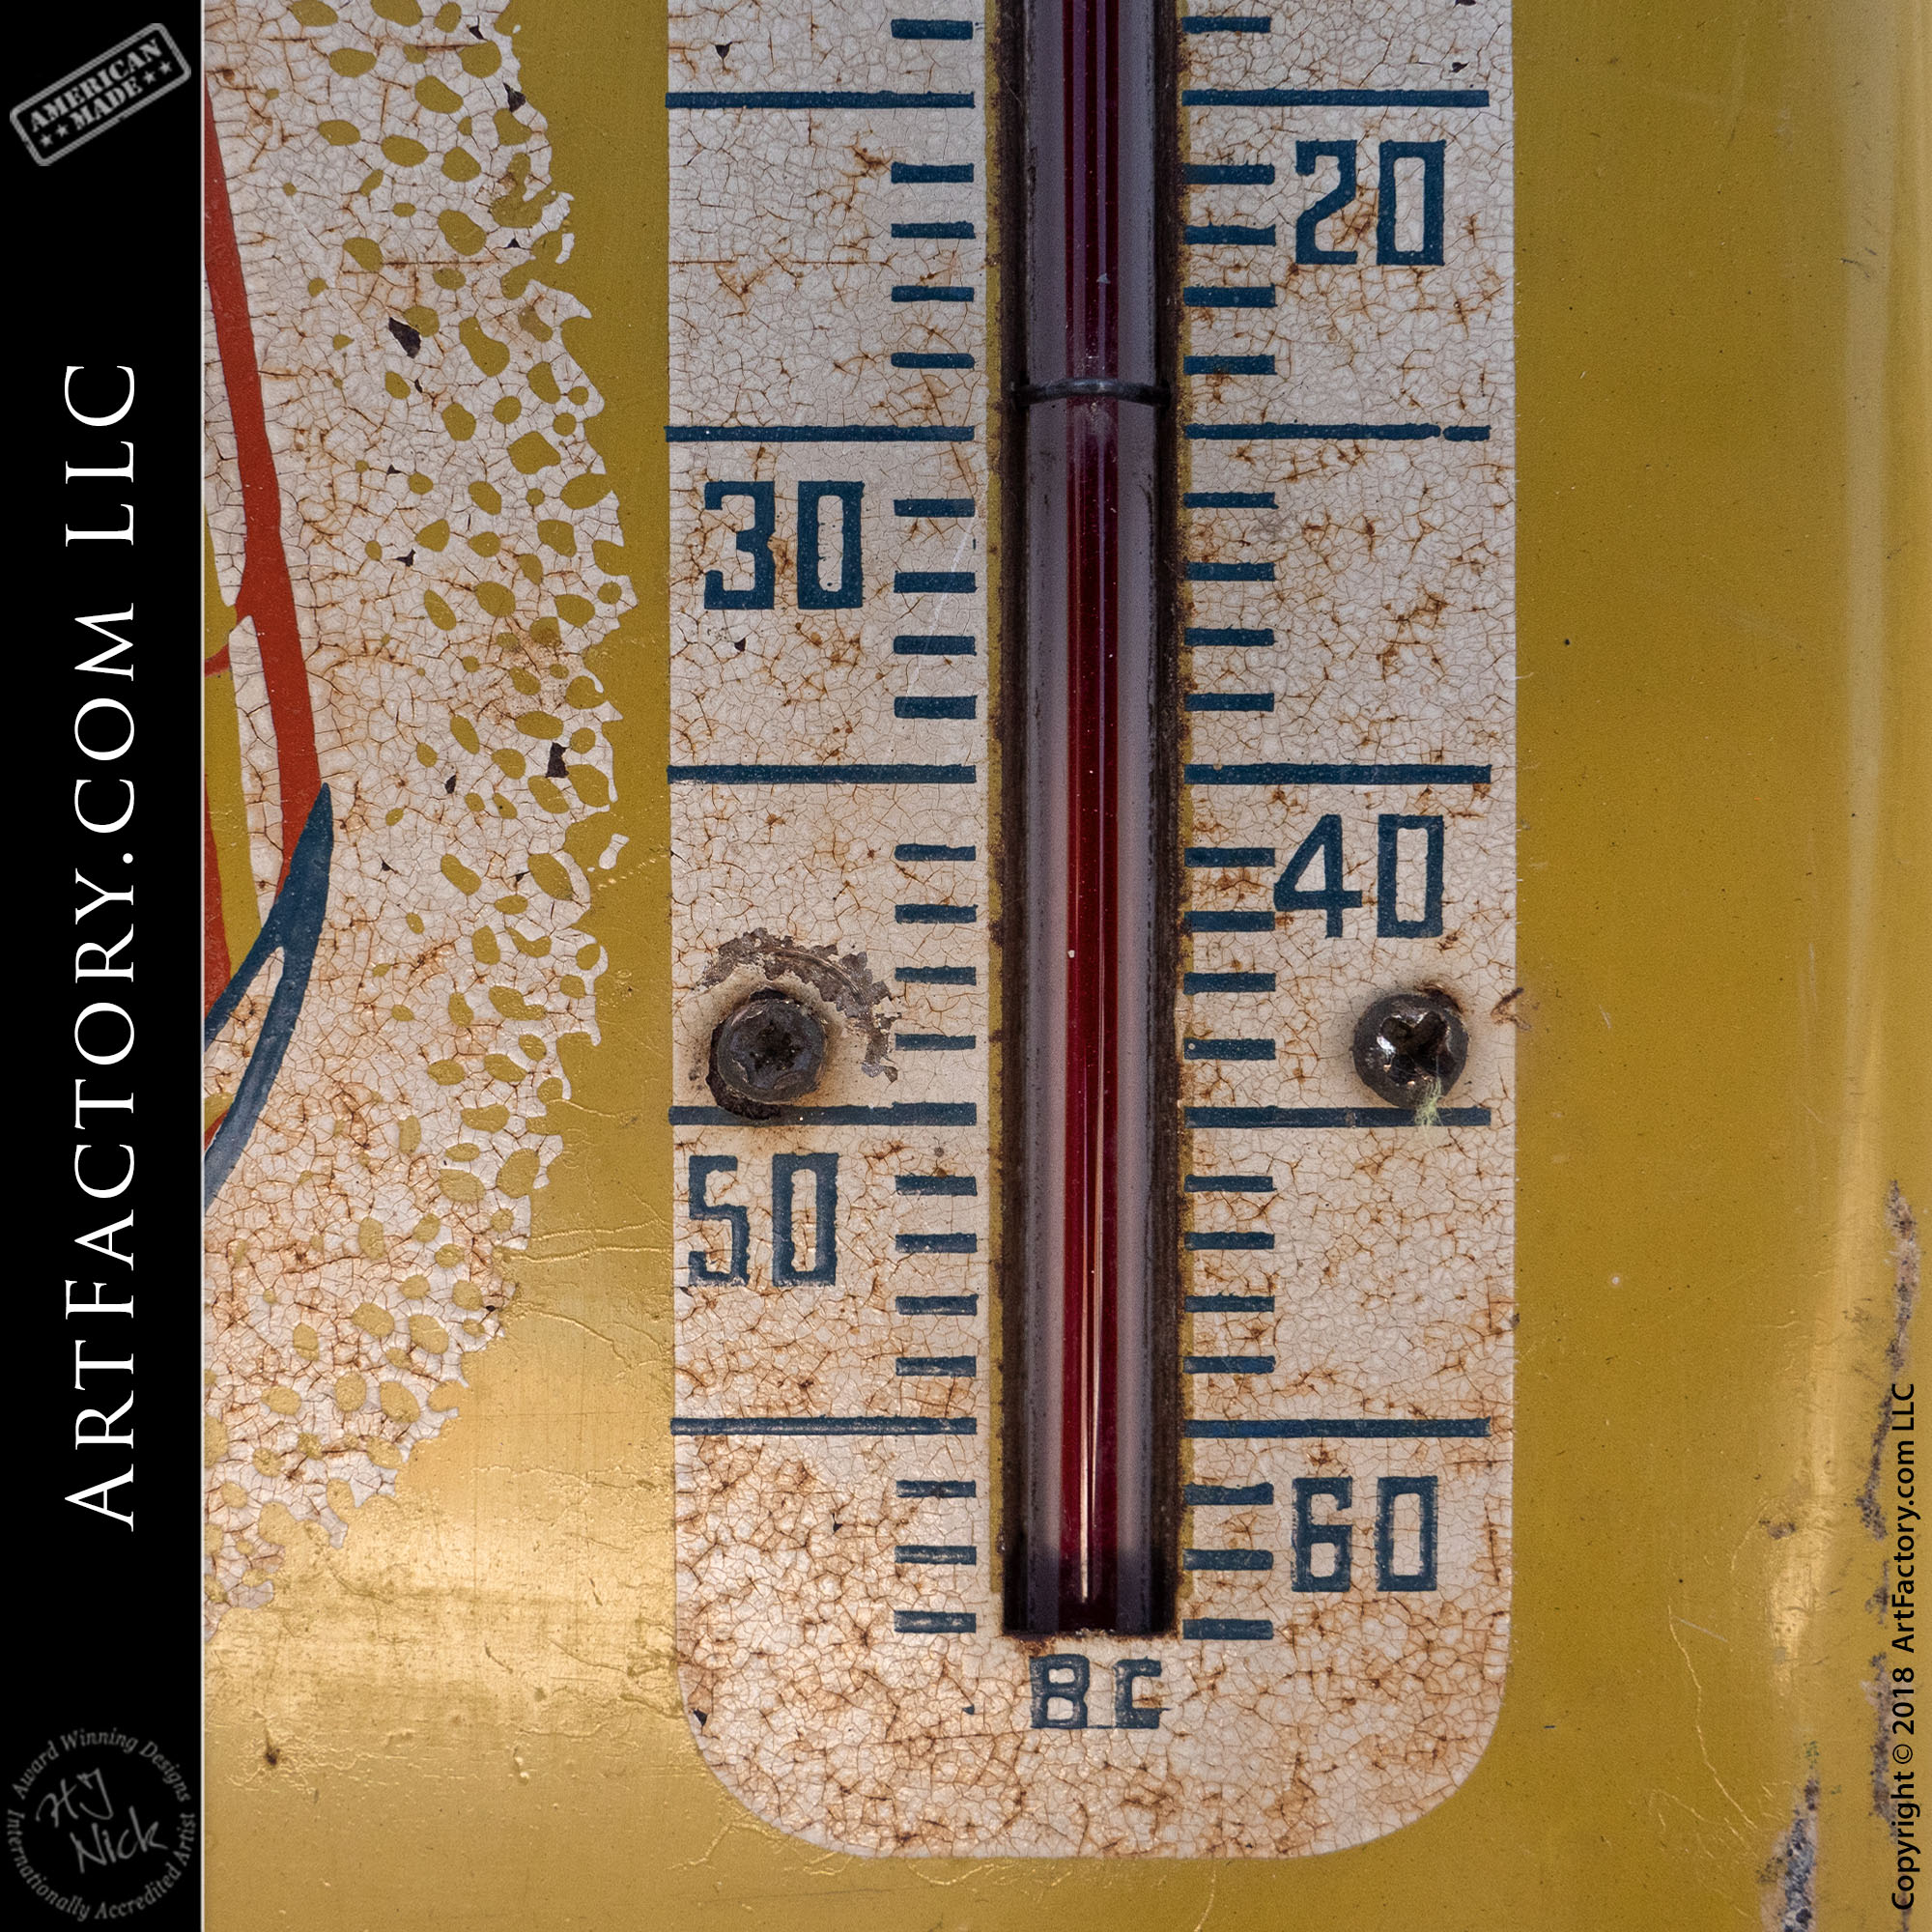 Vintage Thermometer Thermometer Wooden Thermometer Retro